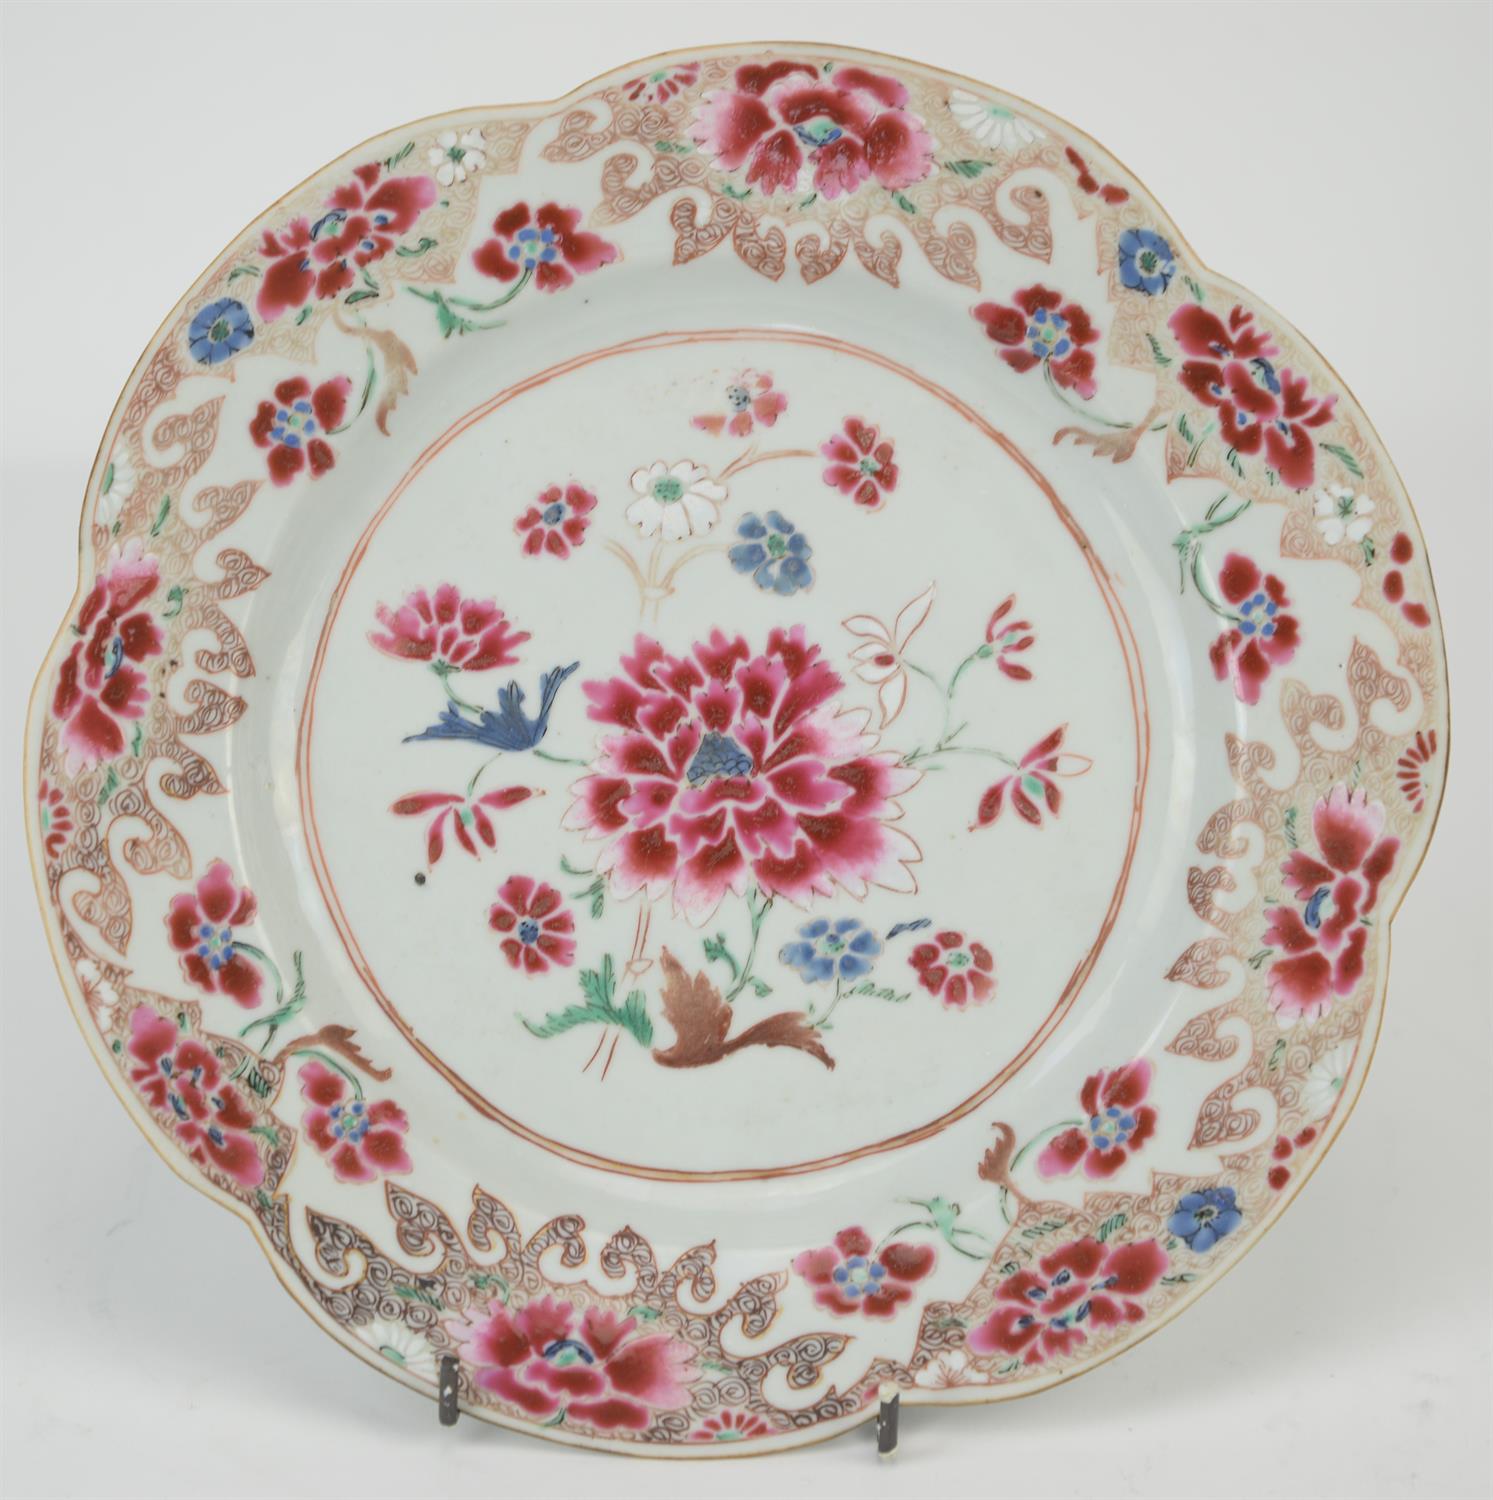 Eight famille rose dishes; each one decorated with floral designs and about 22.5 cm diameter, - Image 10 of 28